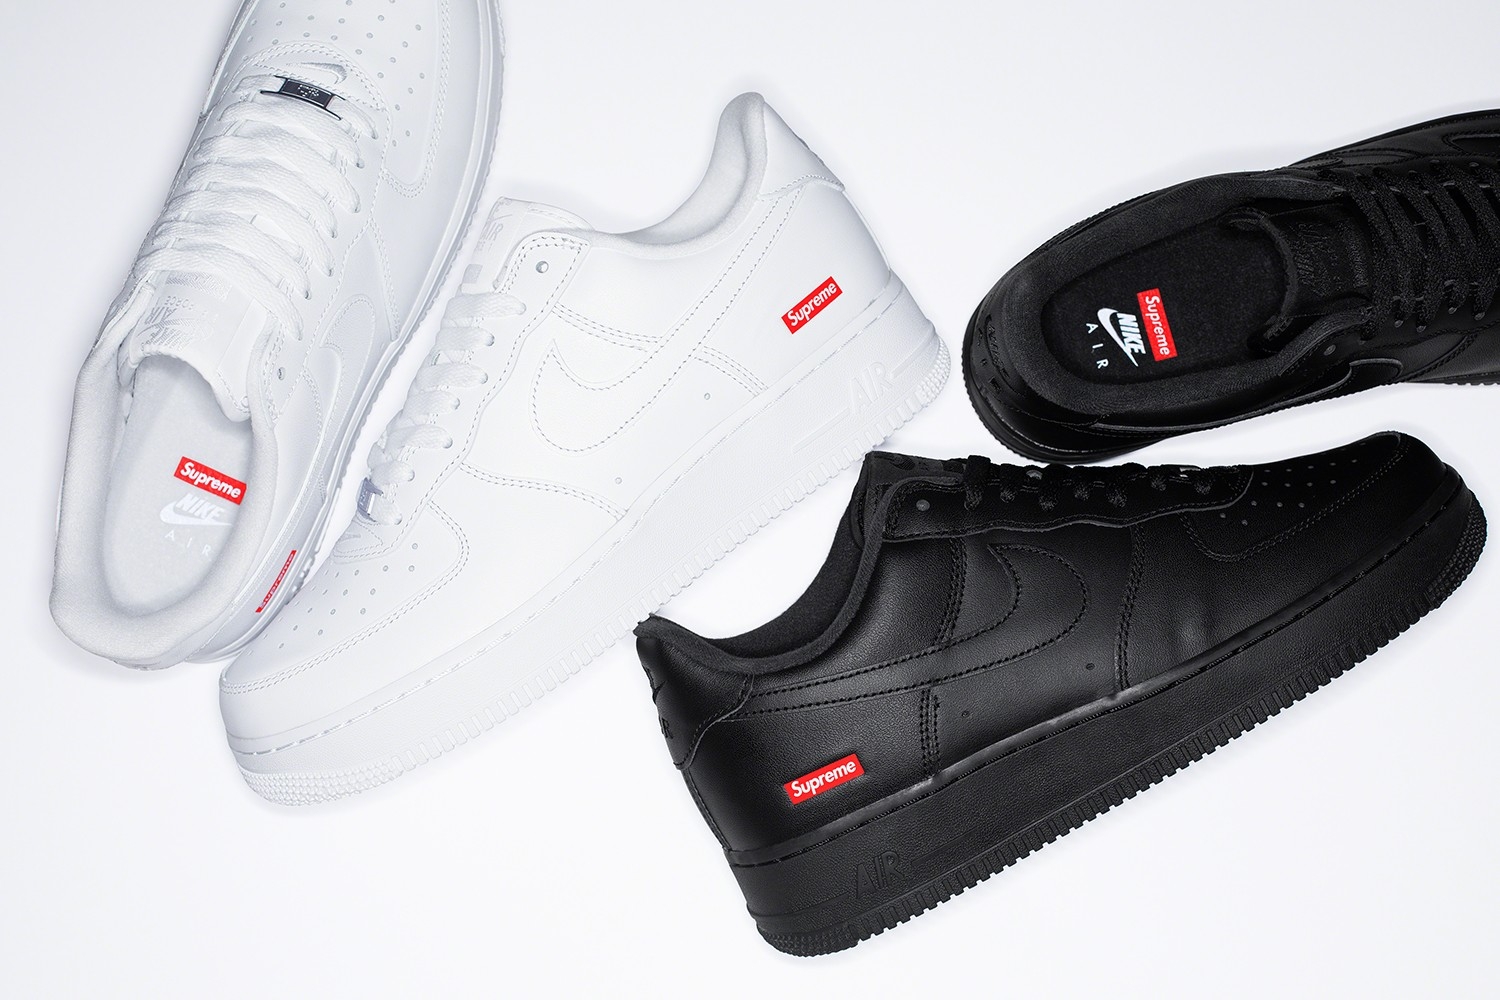 Where To Buy Supreme Nike Air Force 1 And Other Dope Drops This Week